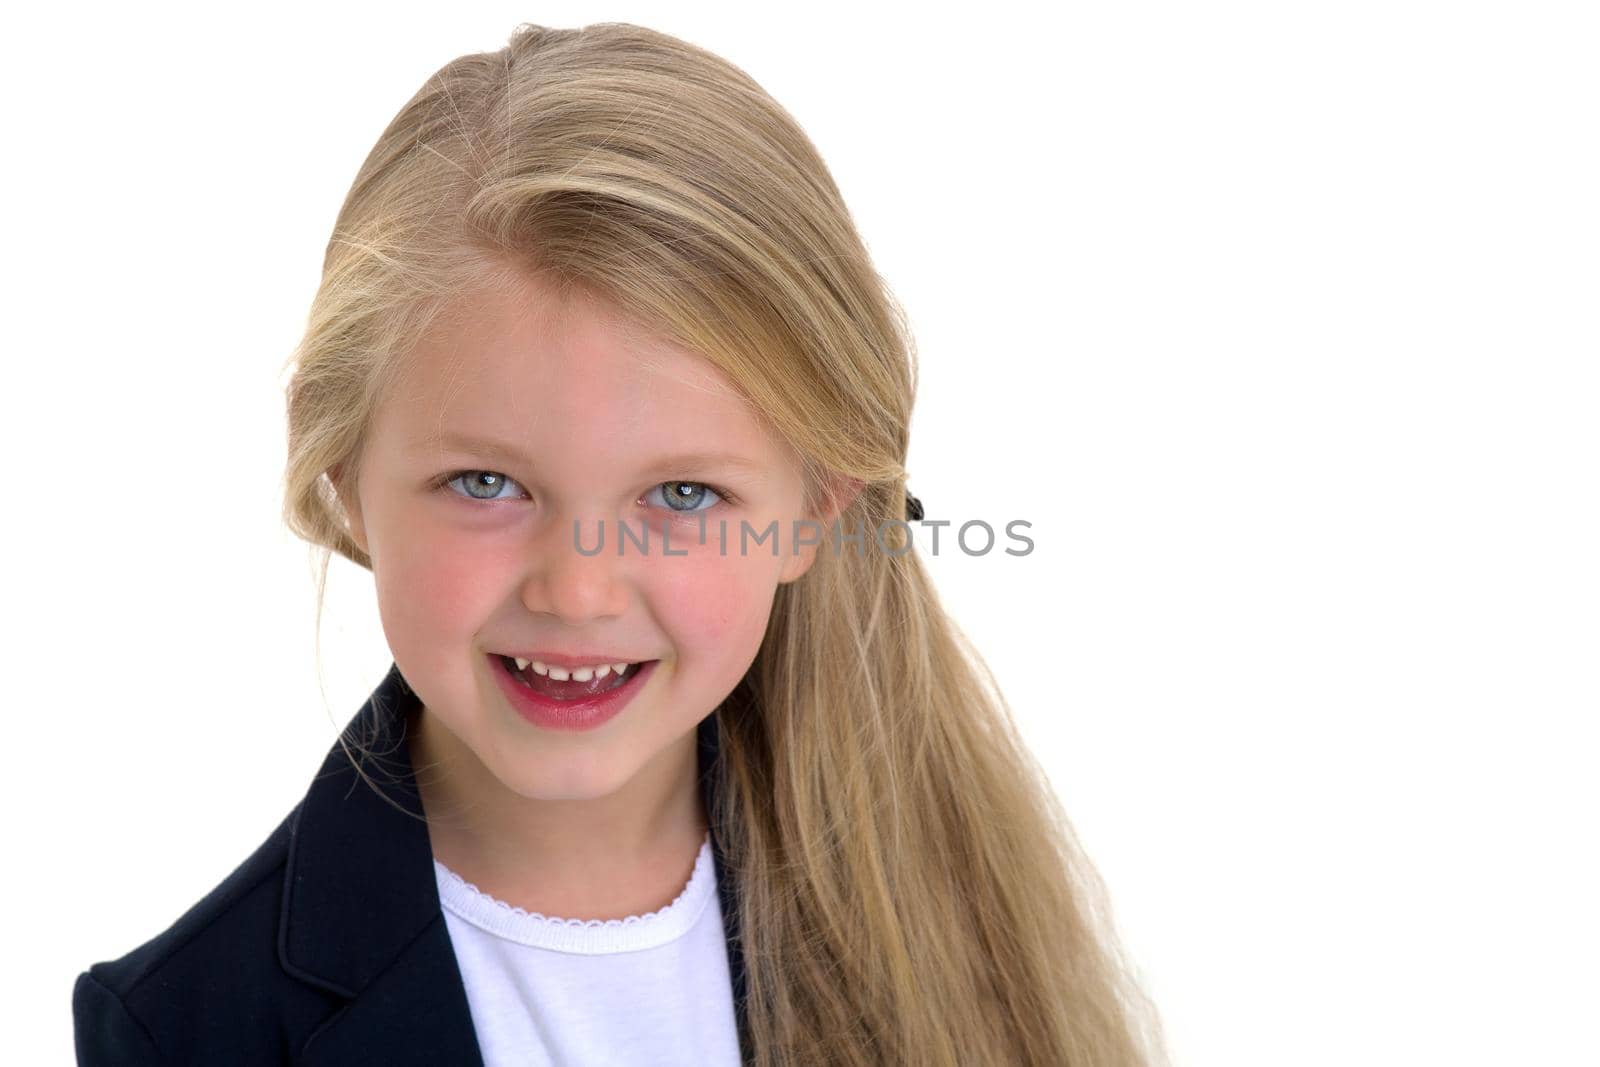 Front view portrait of beautiful little schoolgirl. Adorable blonde long haired girl posing against white background. Cute elementary school student in blue jacket and white blouse